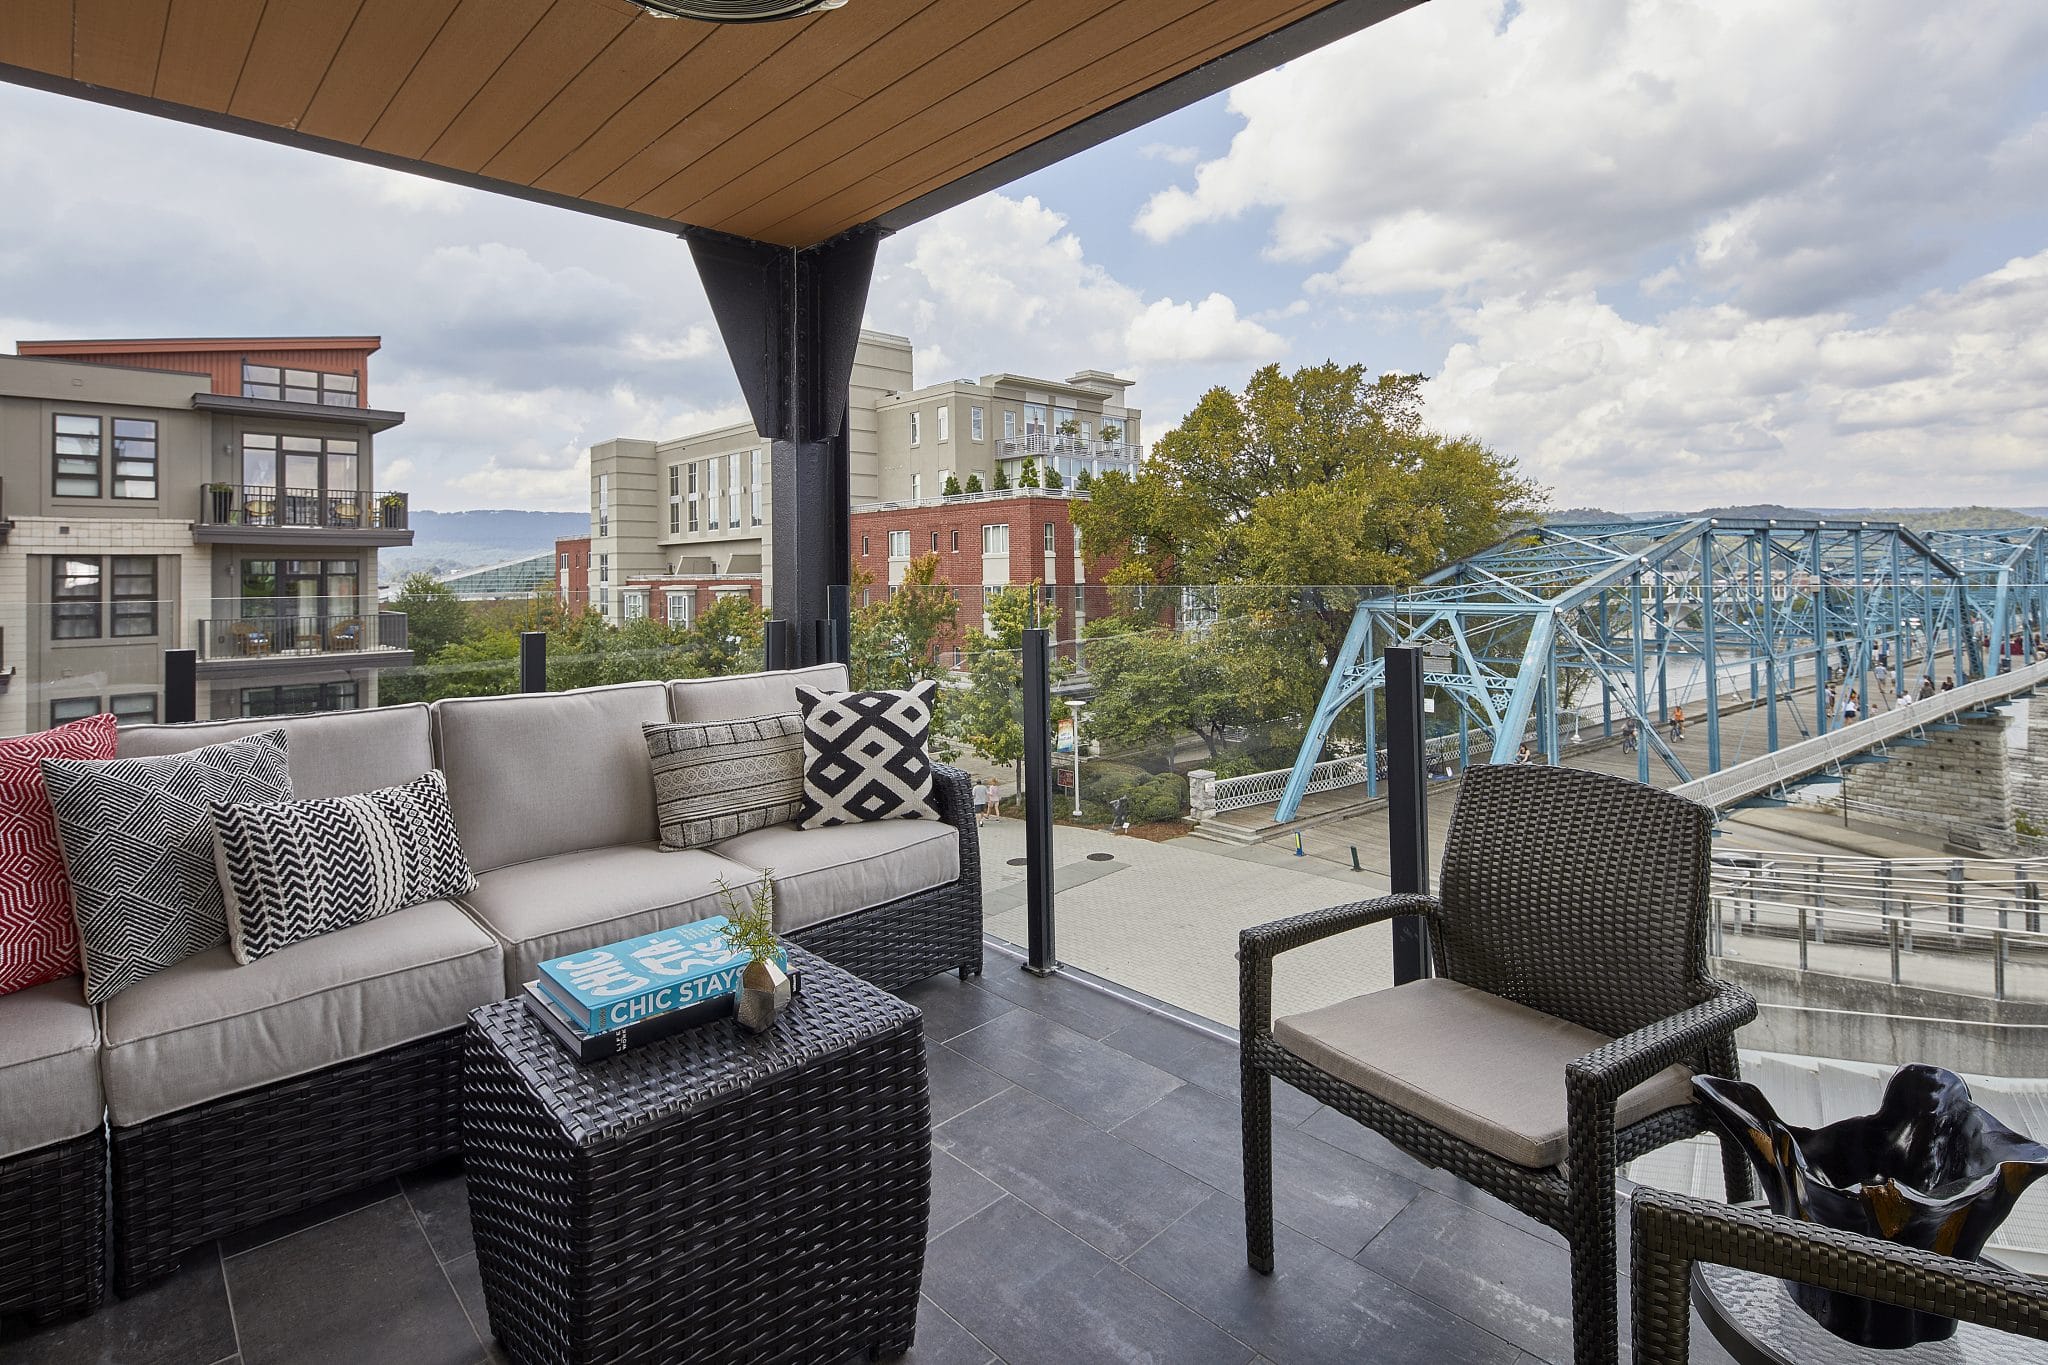 King Suite Balcony at The Edwin Hotel Chattanooga